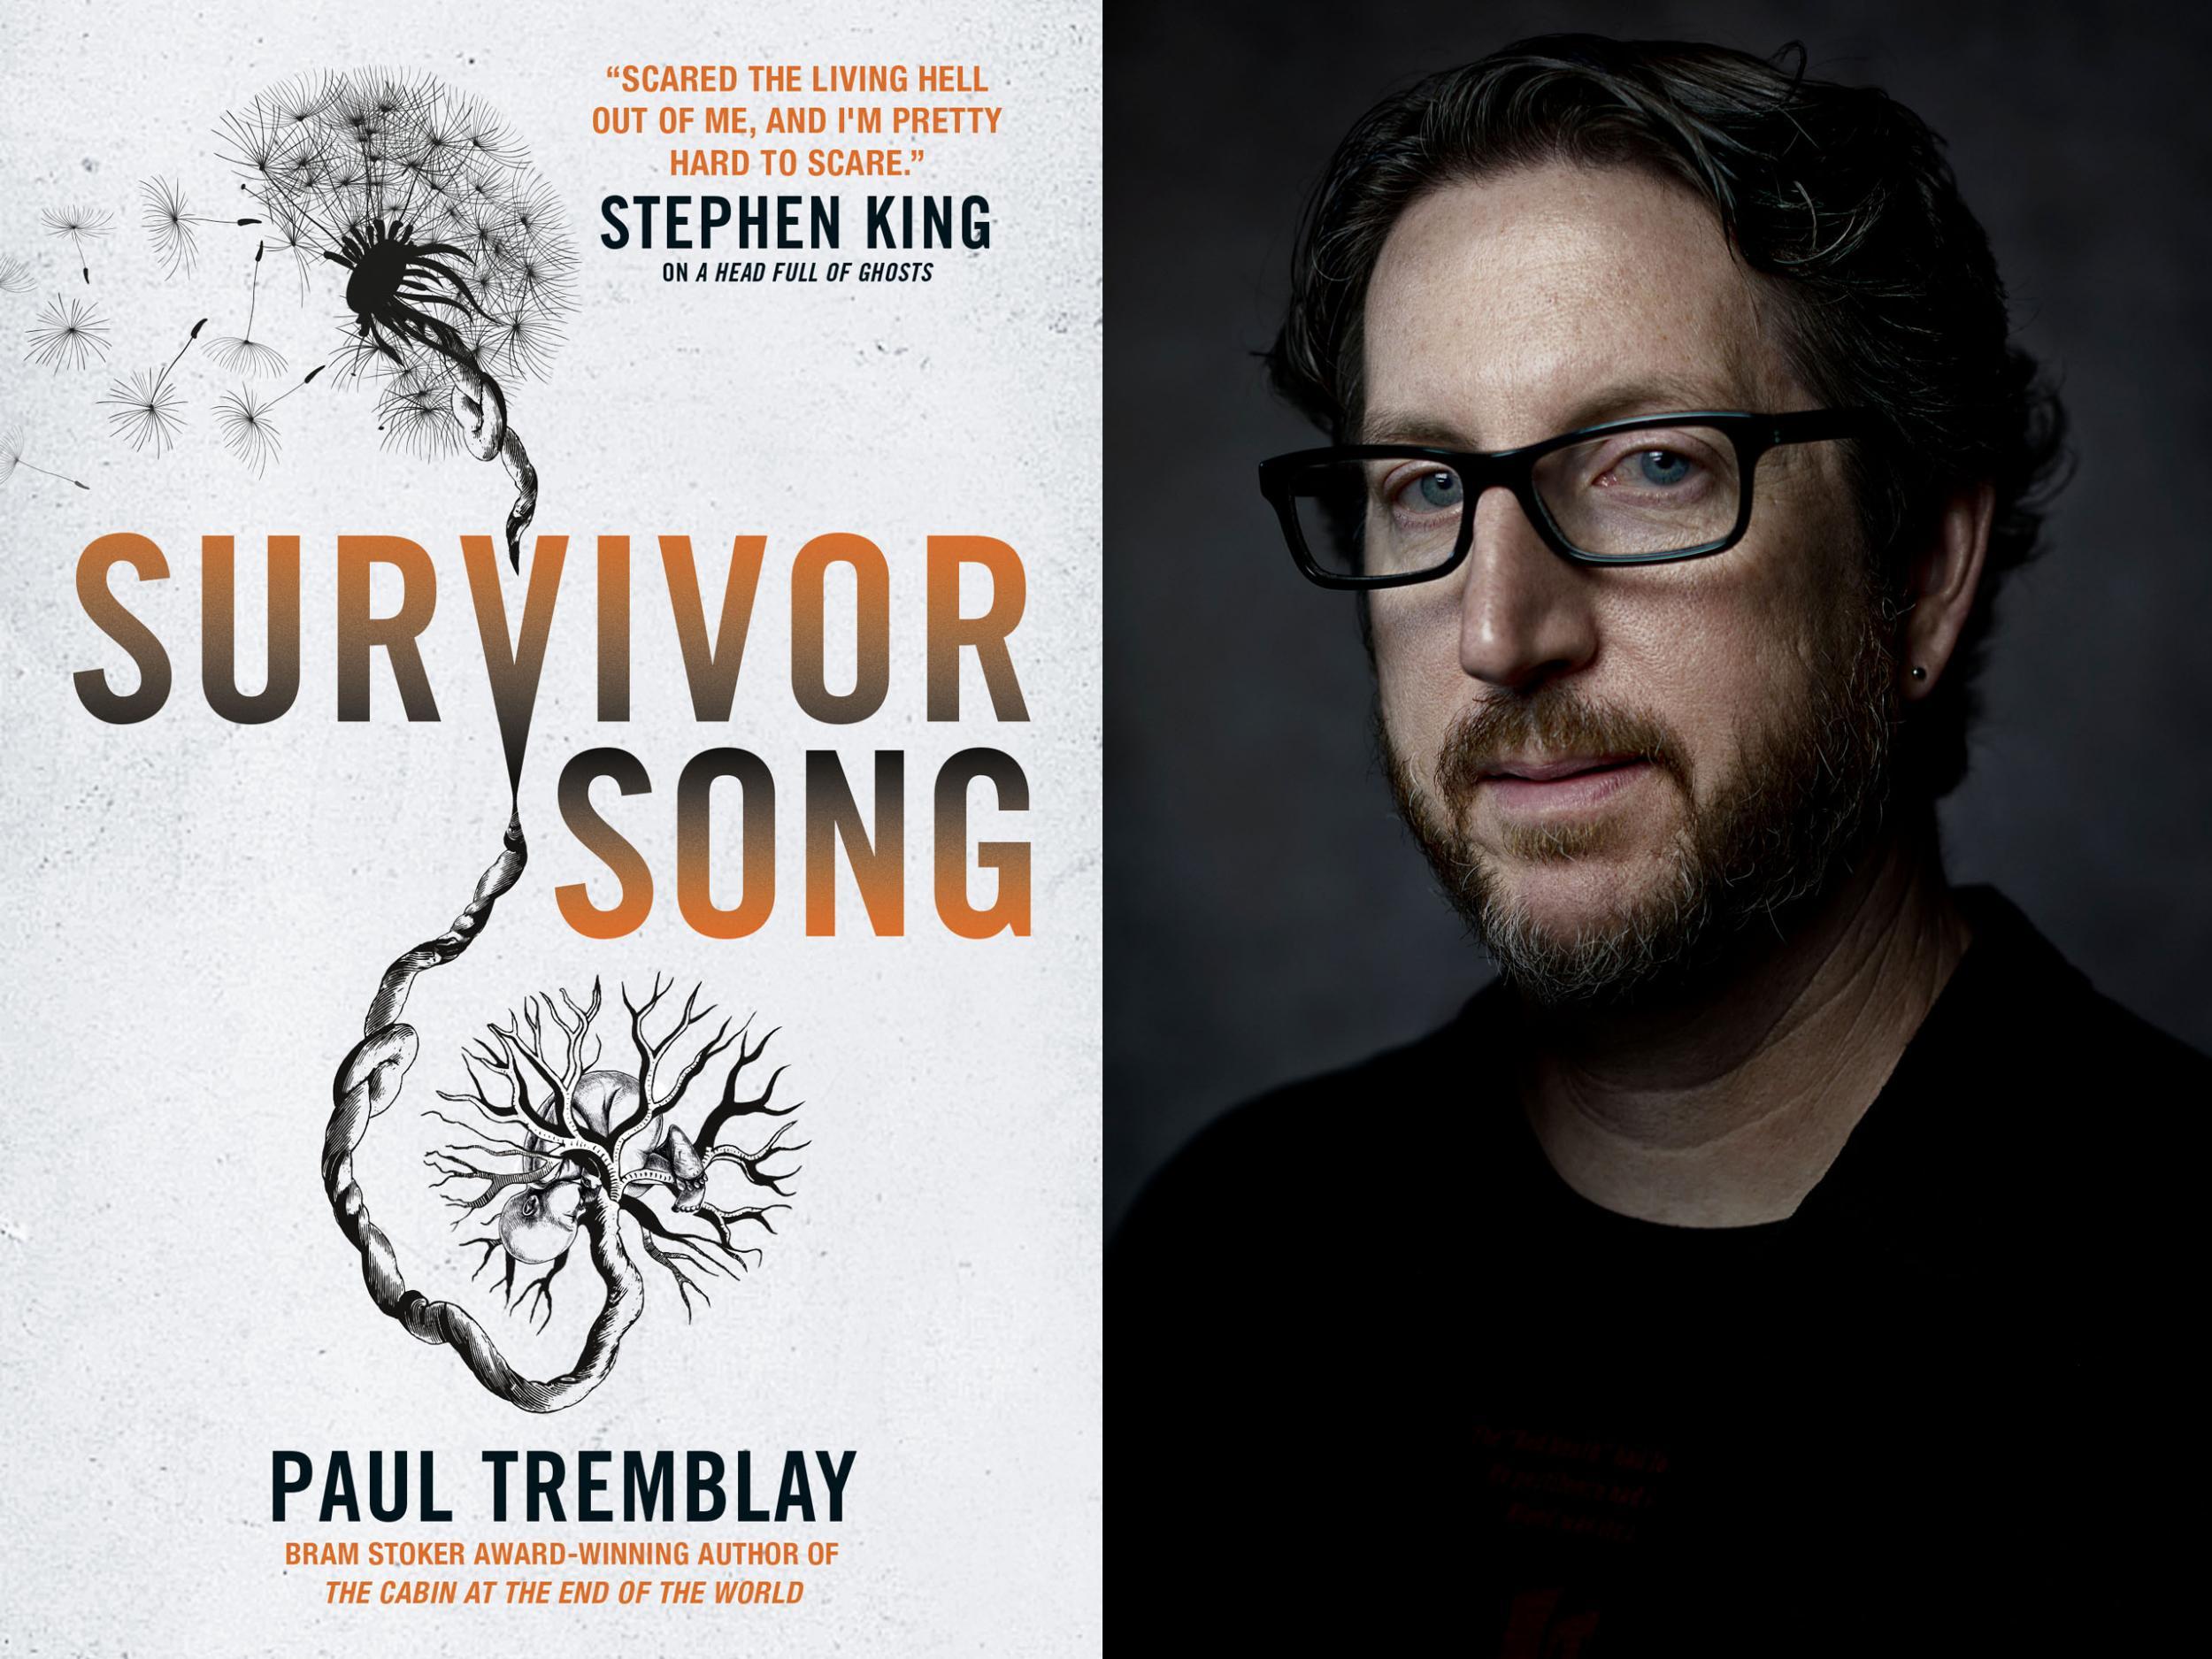 Tremblay’s eighth novel is a fast-paced, intimate take on pandemic fiction